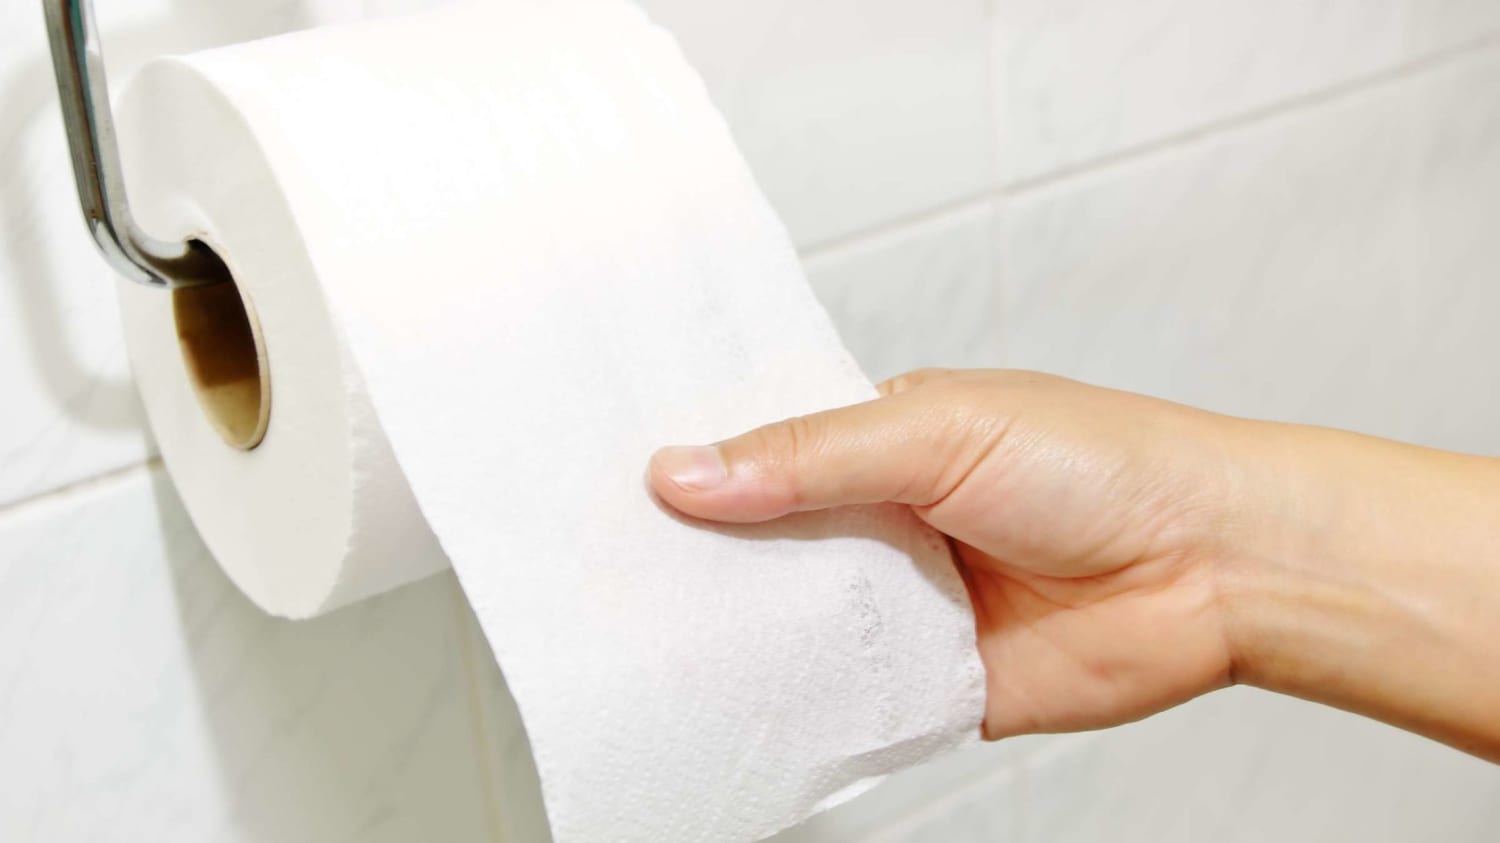 What Did People Use Before Toilet Paper?